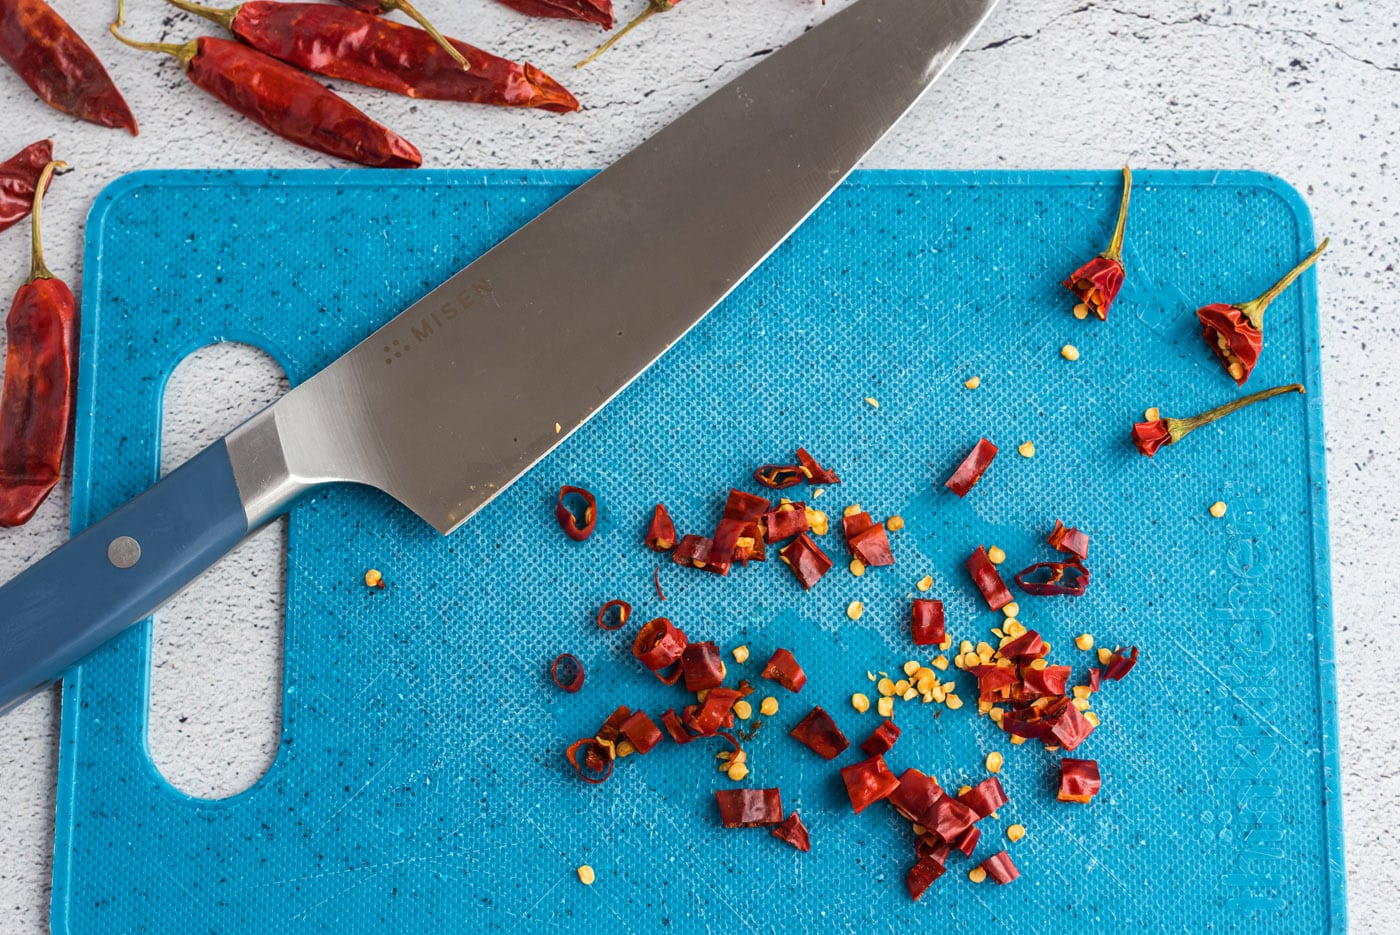 chopped red chile peppers